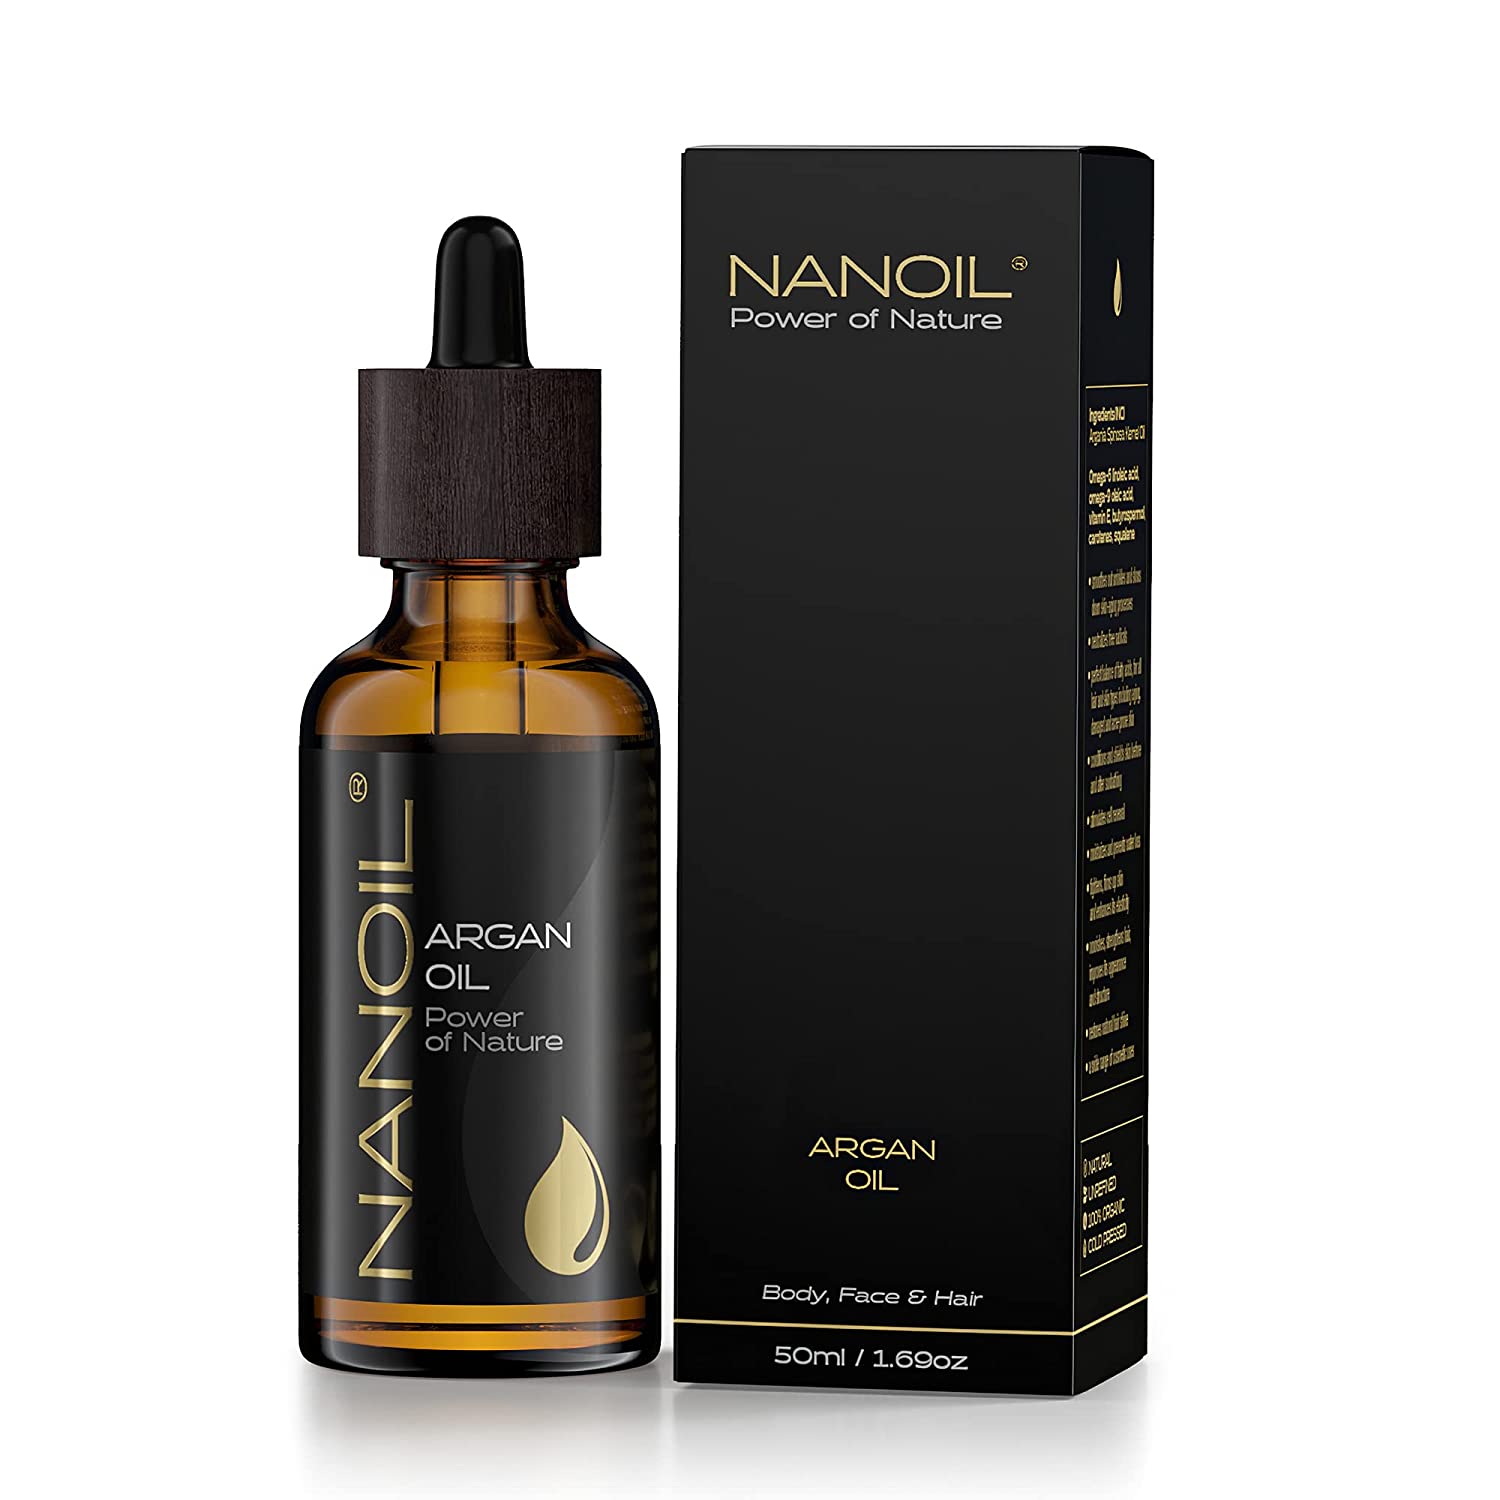 Nanoil Argan Oil - Natural, Pure, Cold Pressed Unroasted Organic Argan Oil Care Oil for Hair, Body and Face 50 ml Natural Care, Regeneration, Heat Protection and Anti-Ageing